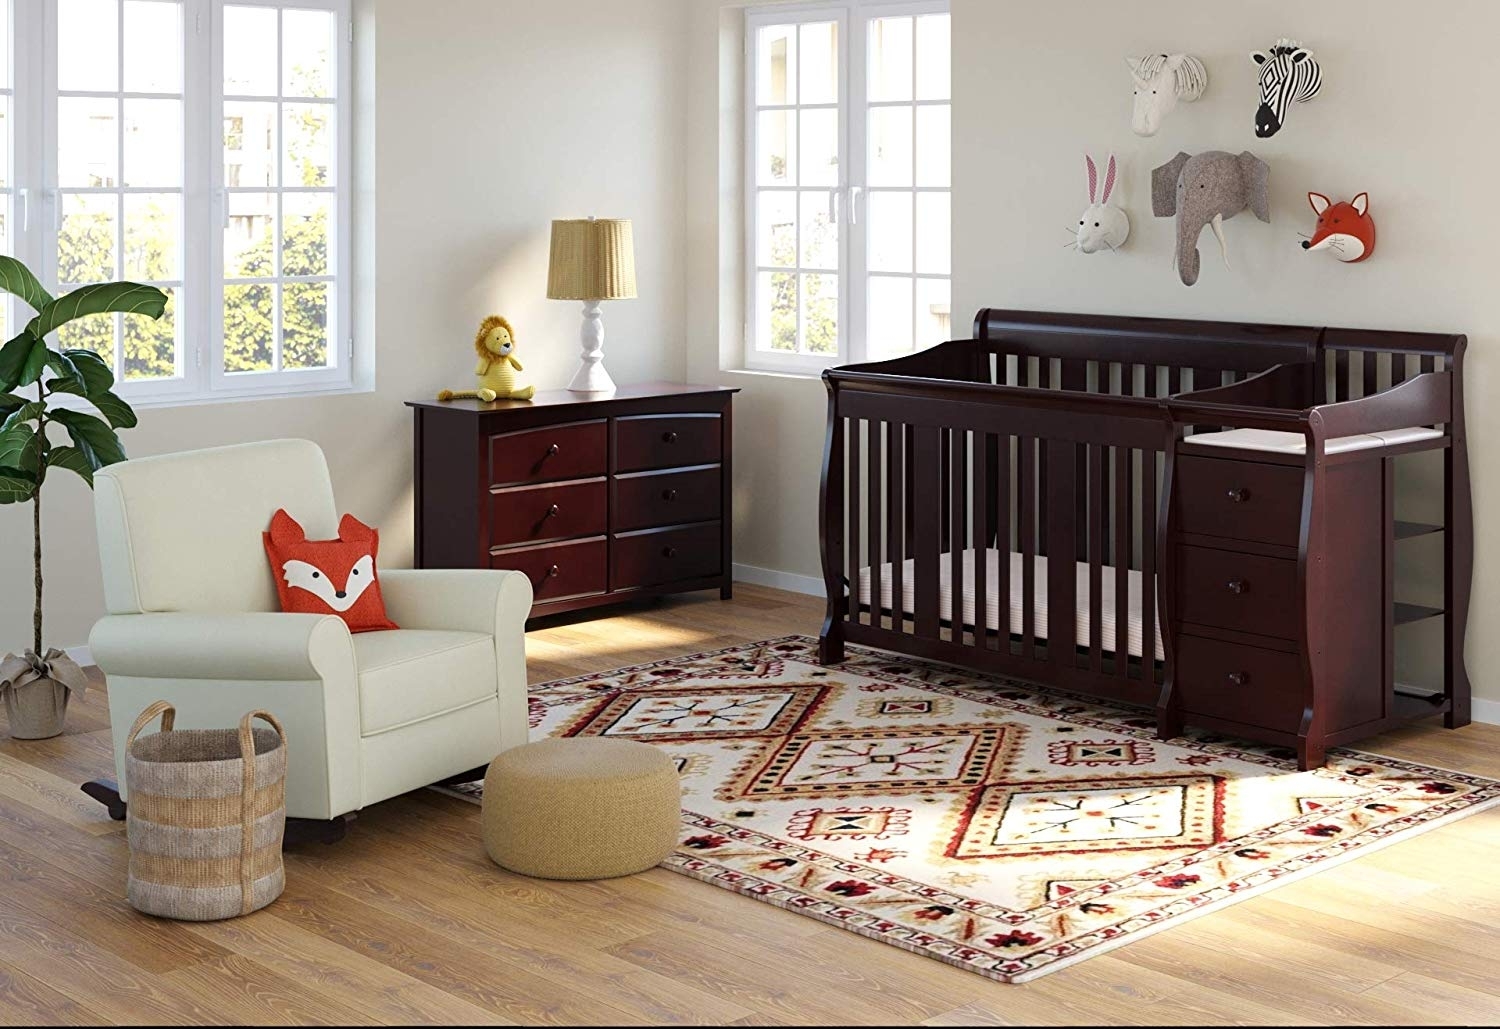 crib with drawers underneath and changing table